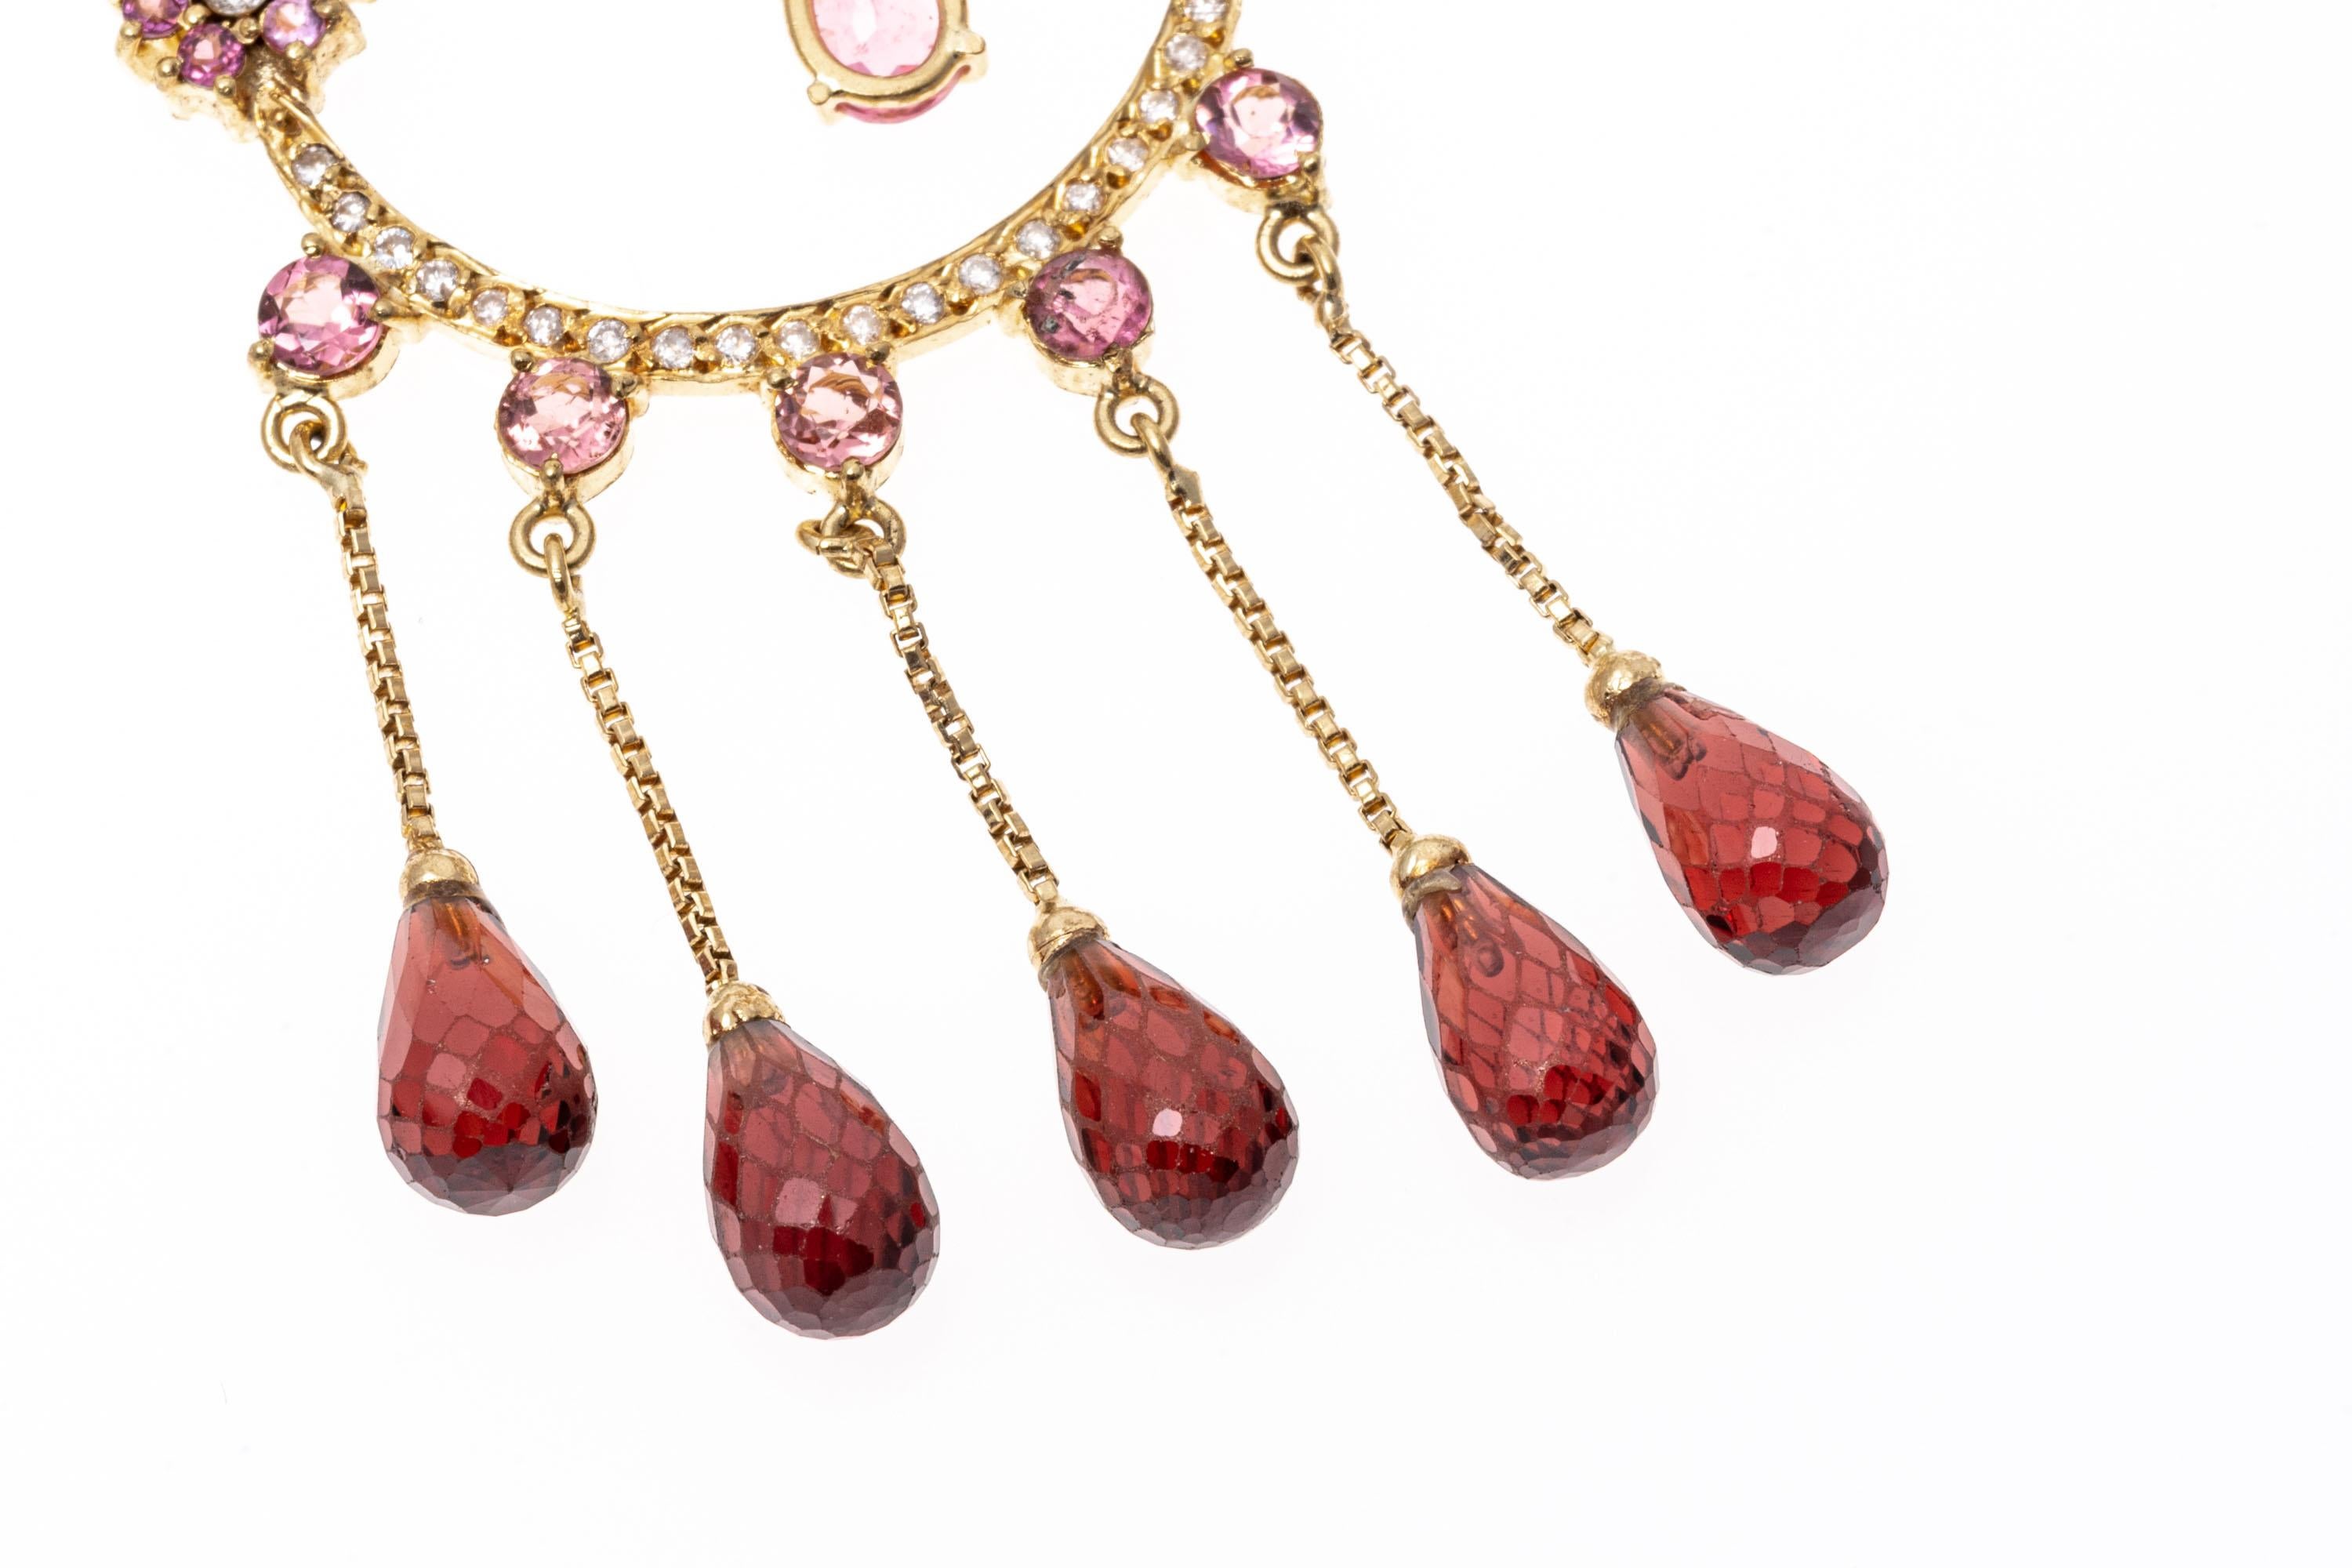 Striking 14K Gold, Pink Tourmaline, Diamond And Garnet Chandelier Earrings.
A truly unique pair of chandelier earrings that is sure to make a striking statement. These earrings are crafted of 14K yellow gold and set with round cut pink tourmalines.